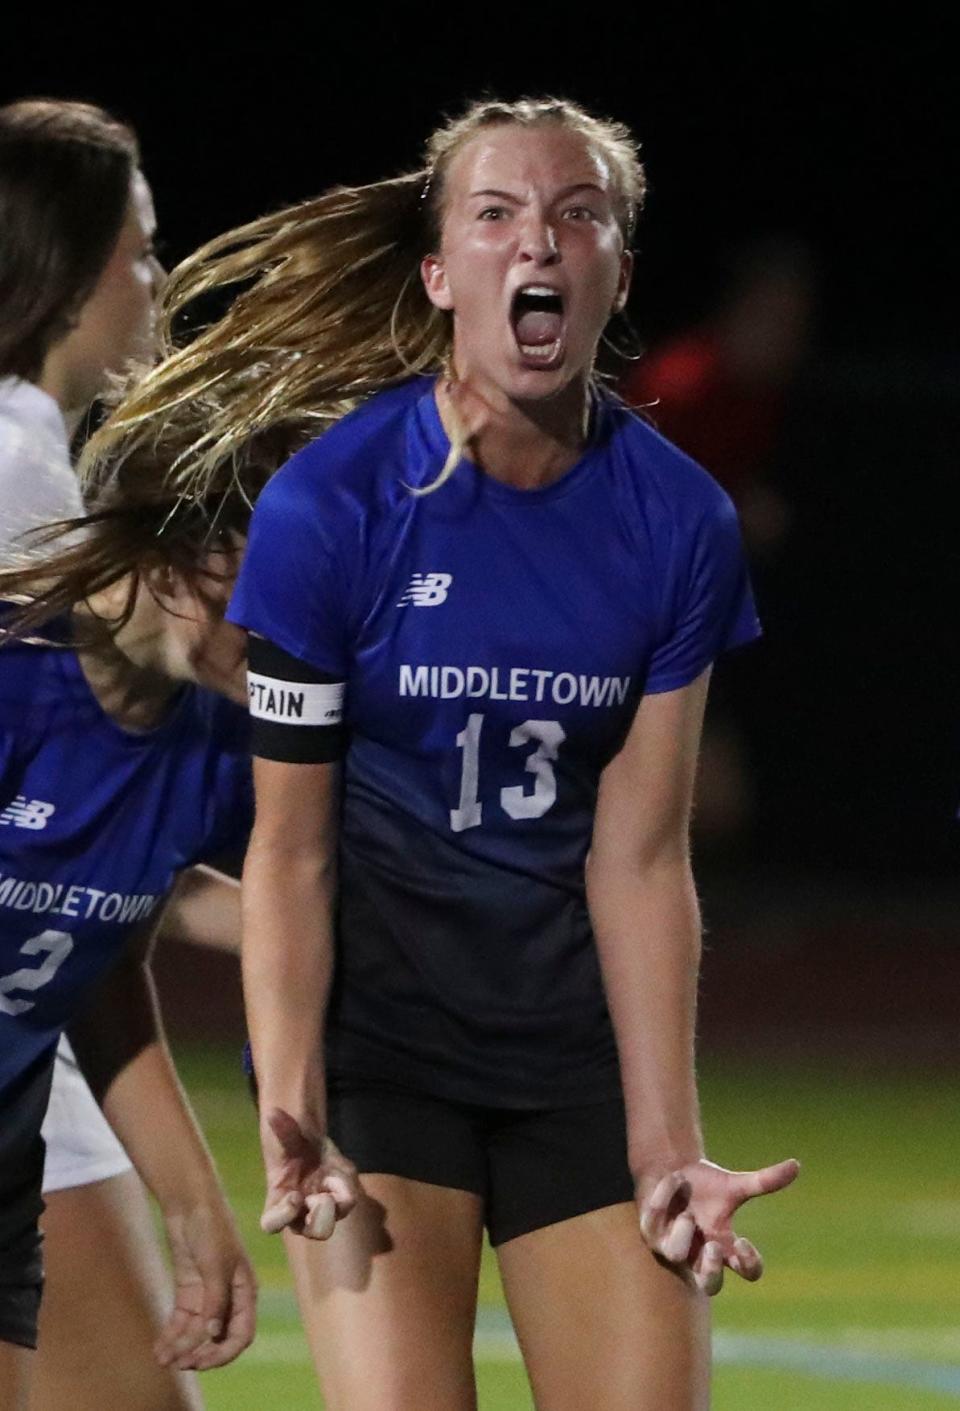 Gabby Riley of Middletown girls soccer is the Delaware Online Athlete of the Week for Week 11 of the spring season.